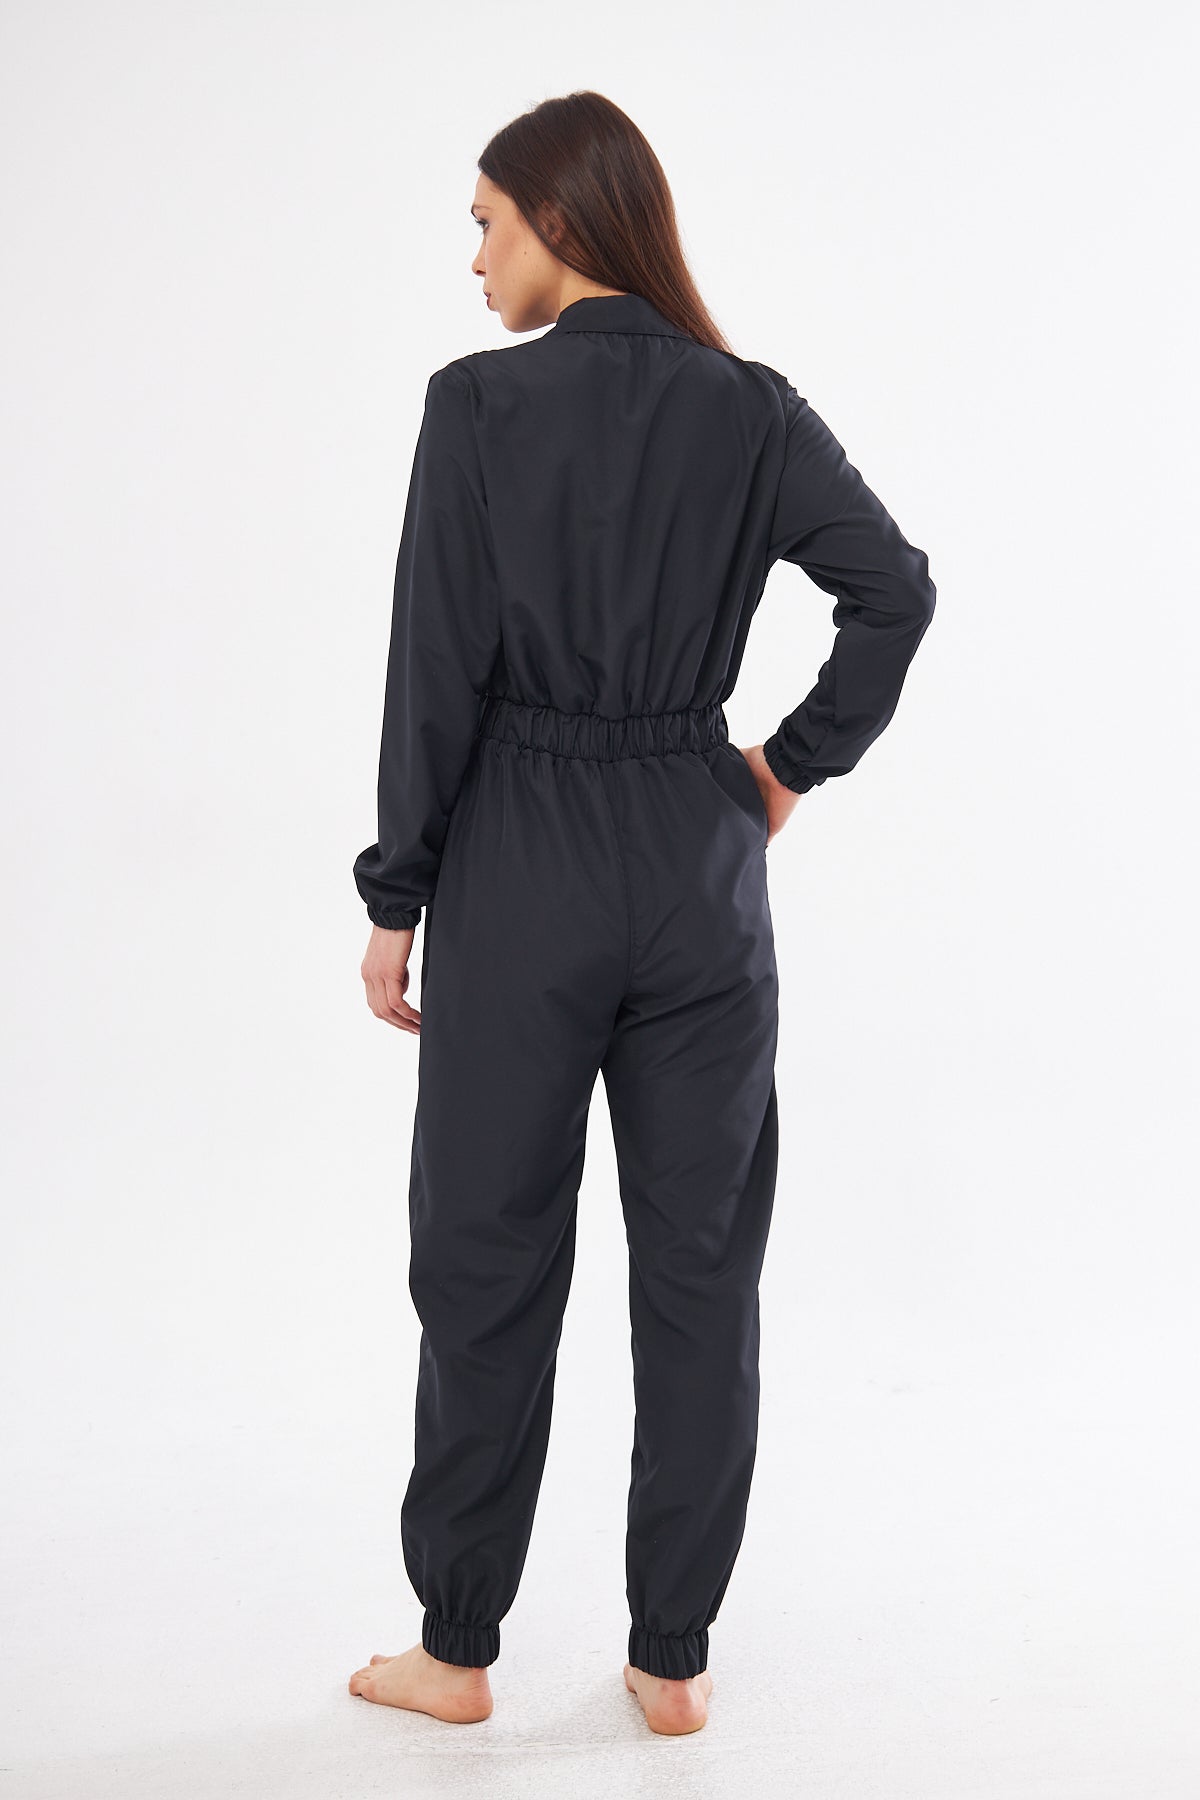 By Suu Sever Navy Blue Jumpsuit Hijab Swimsuit